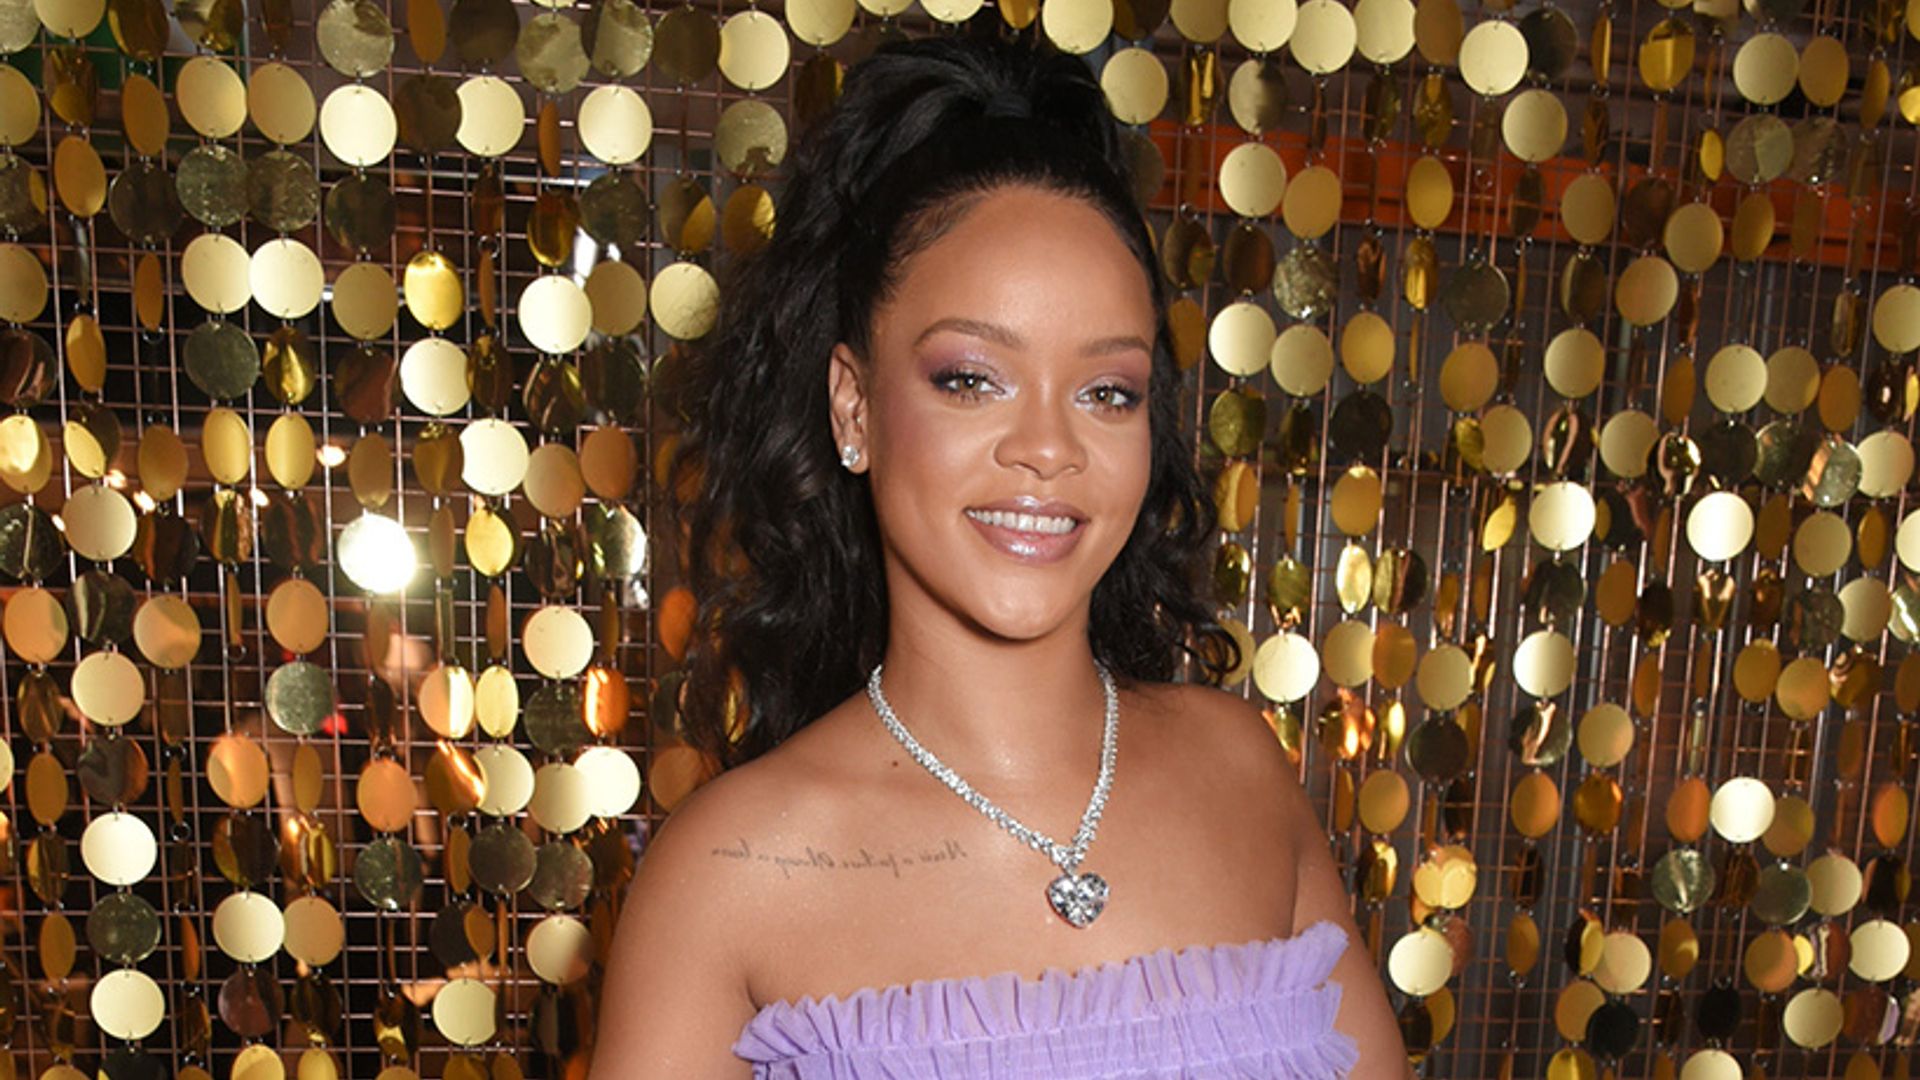 Prepare yourselves: Rihanna just teased a brand new Fenty Beauty product